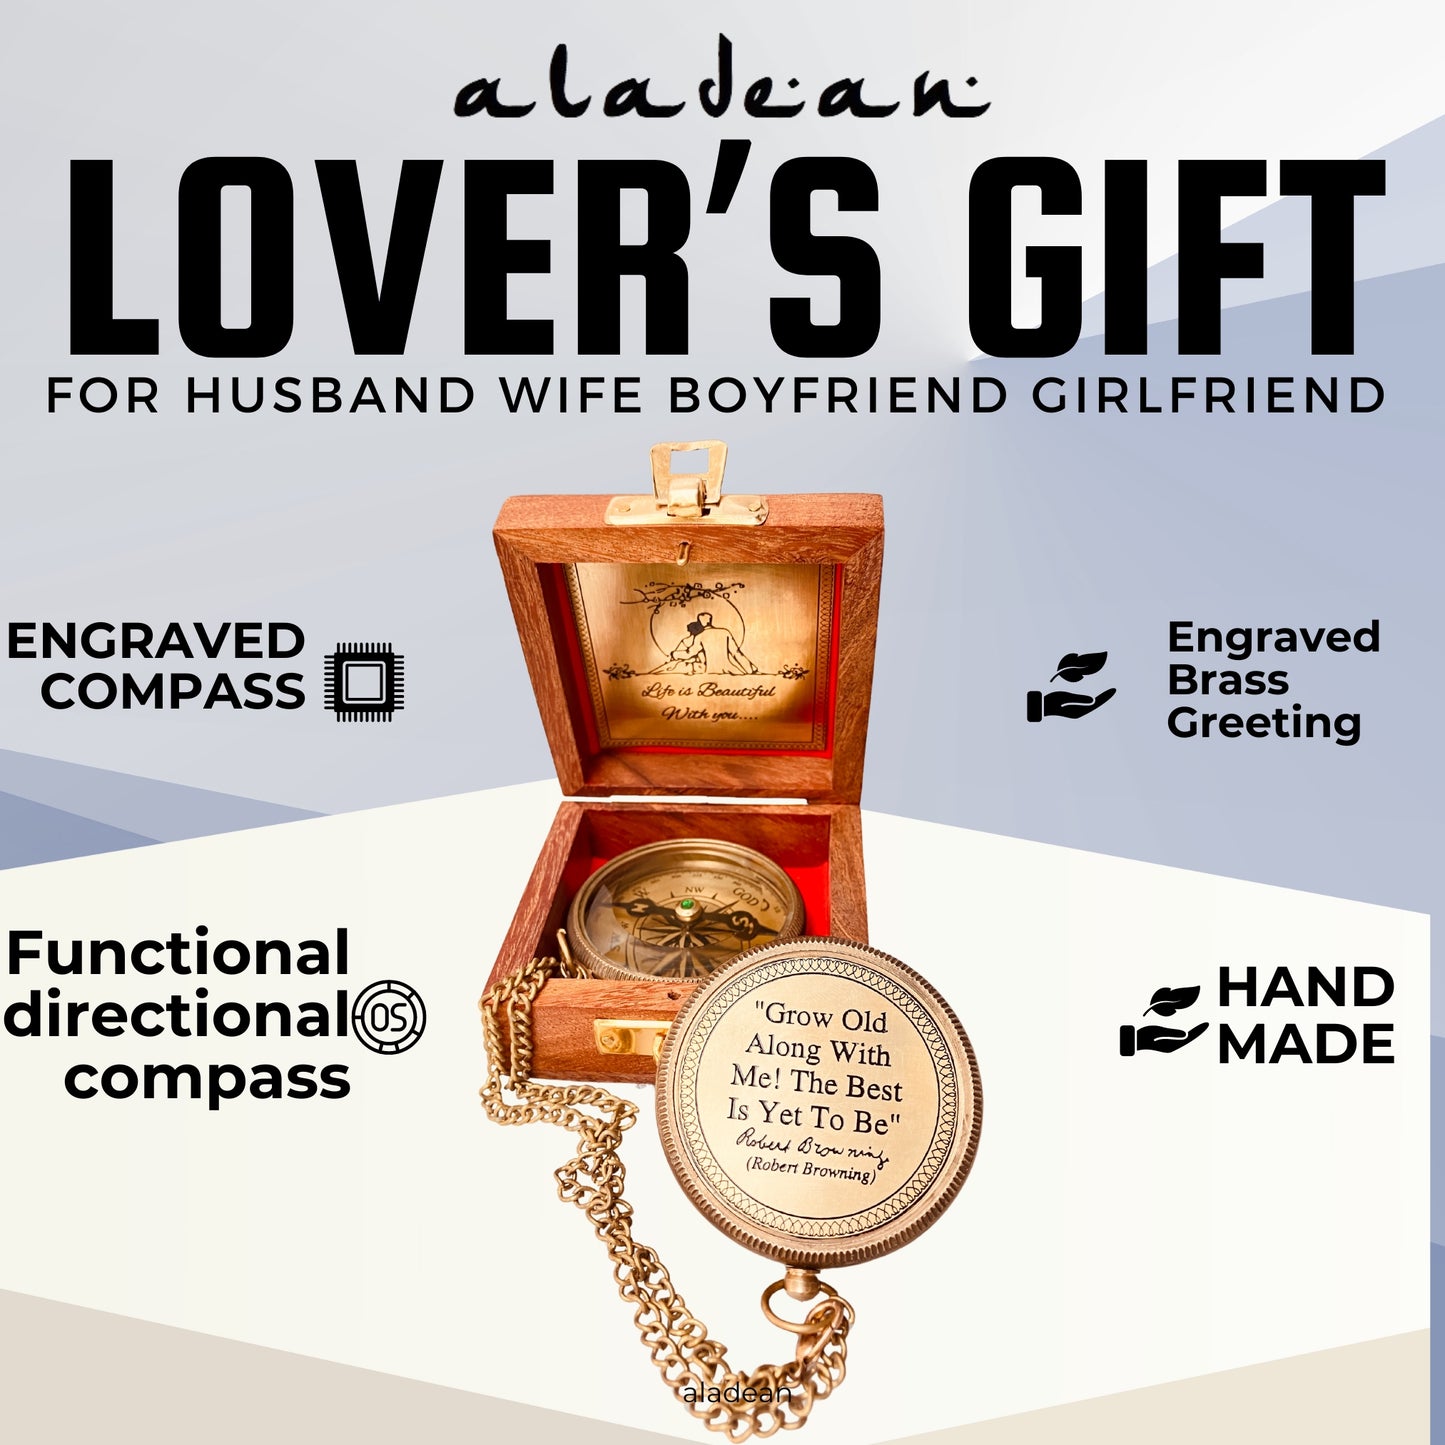 Lovers Gift Romantic Quote Engraved Compass